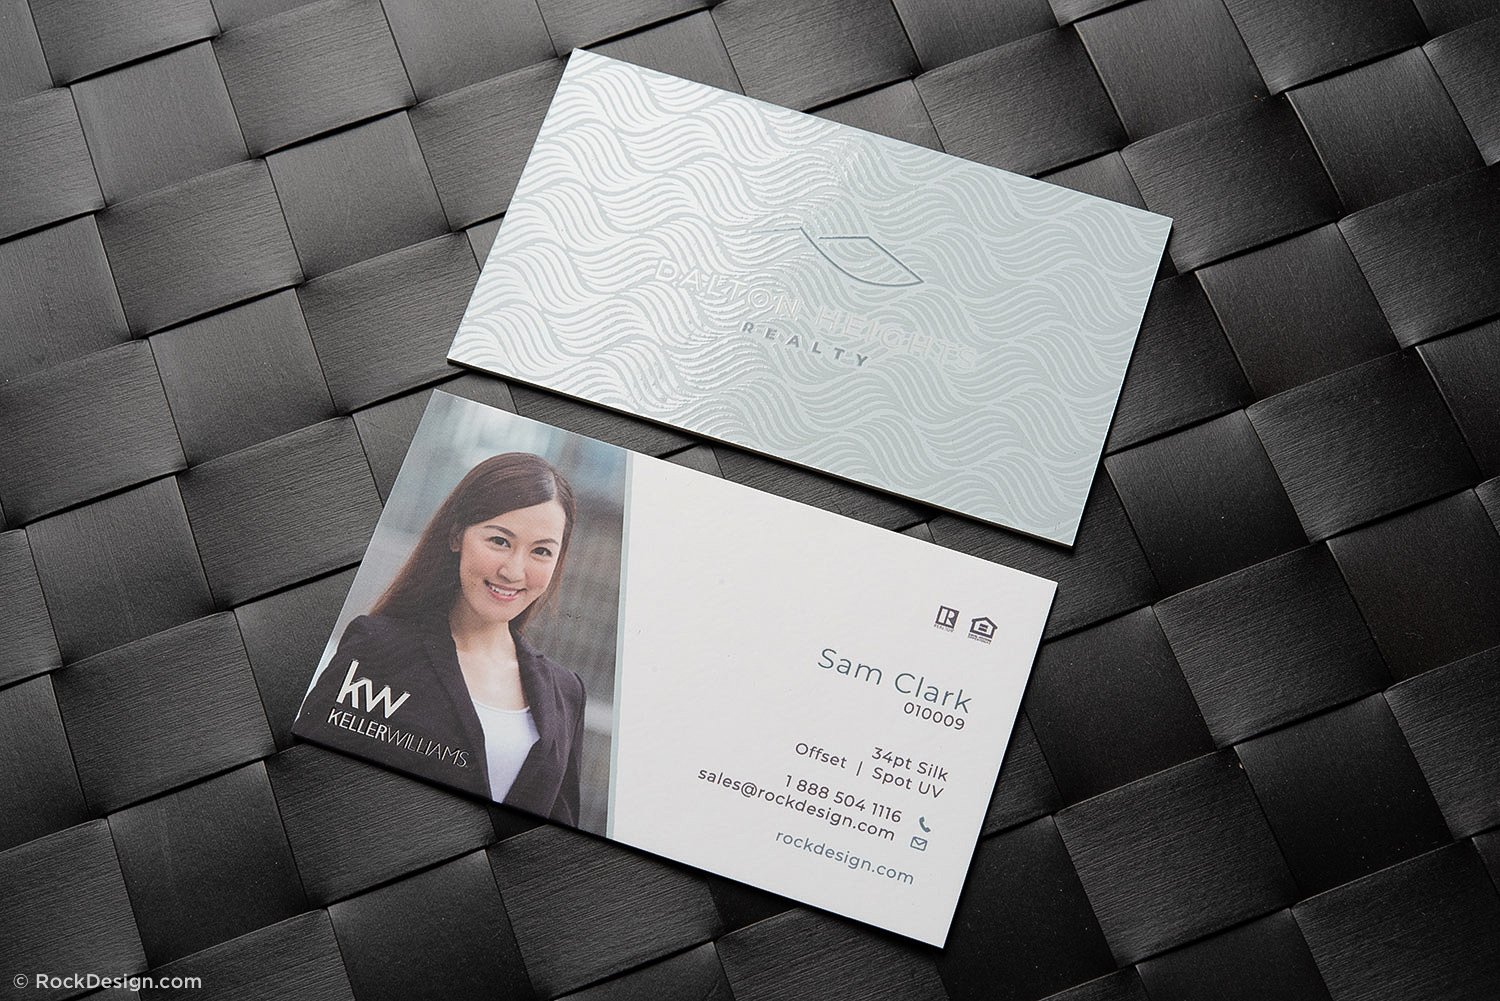 Pure Black 34 pt Soft Touch Laminated Foil Stamed Business Cards